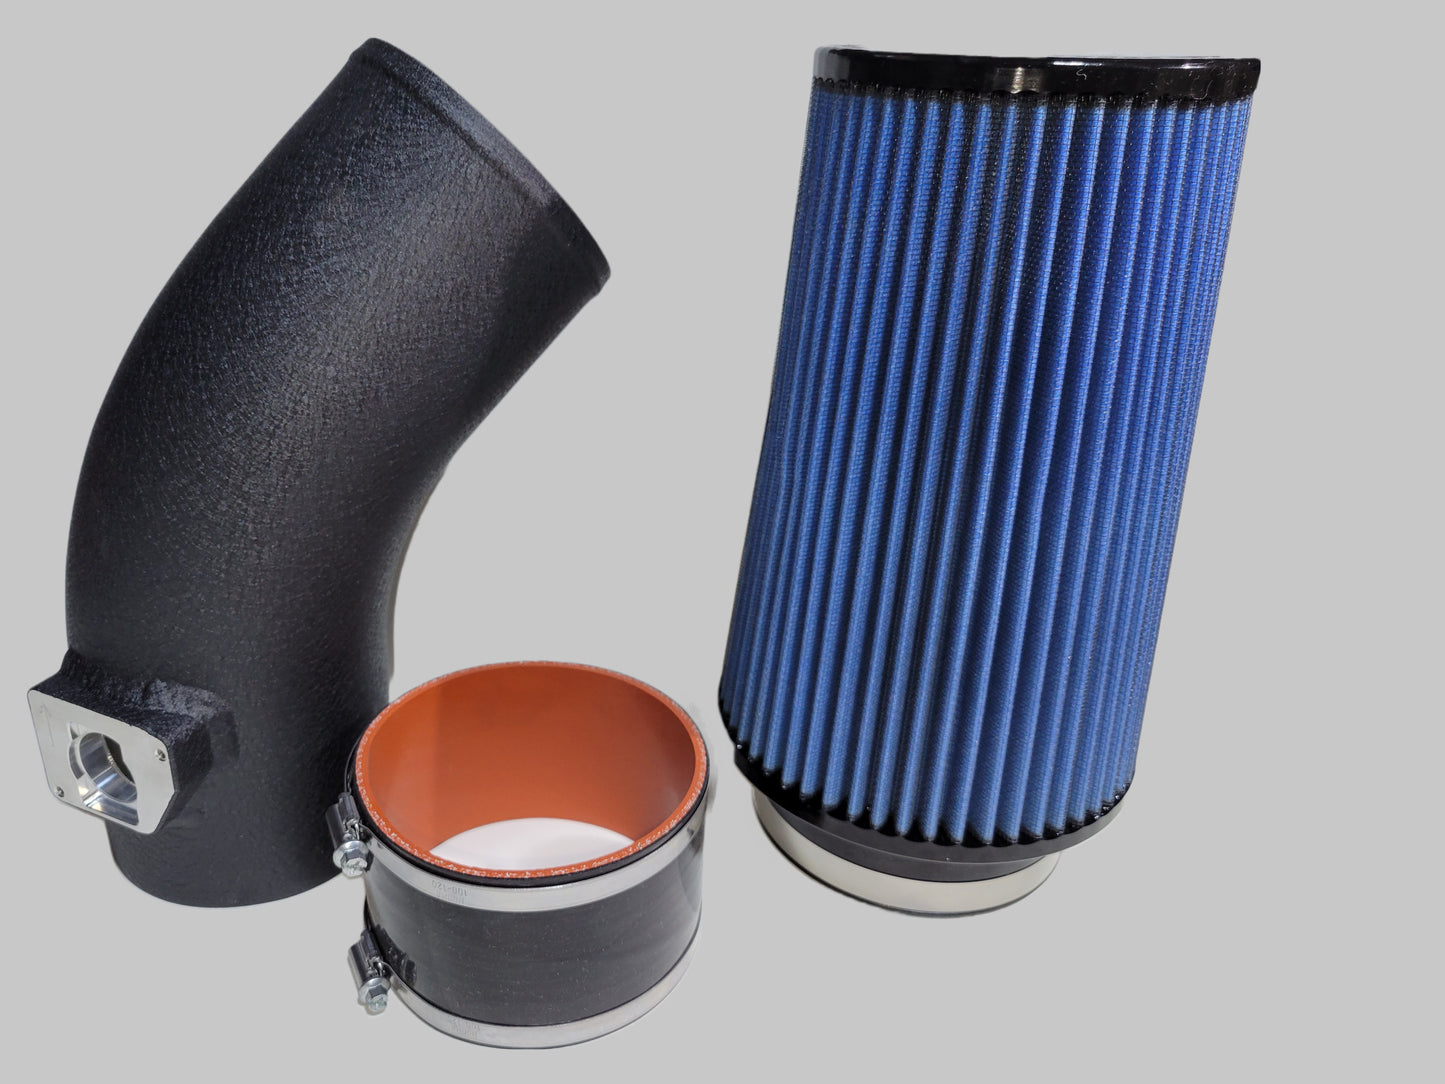 Torque-Factory 4.5" Intake System with MAF housing and air filter